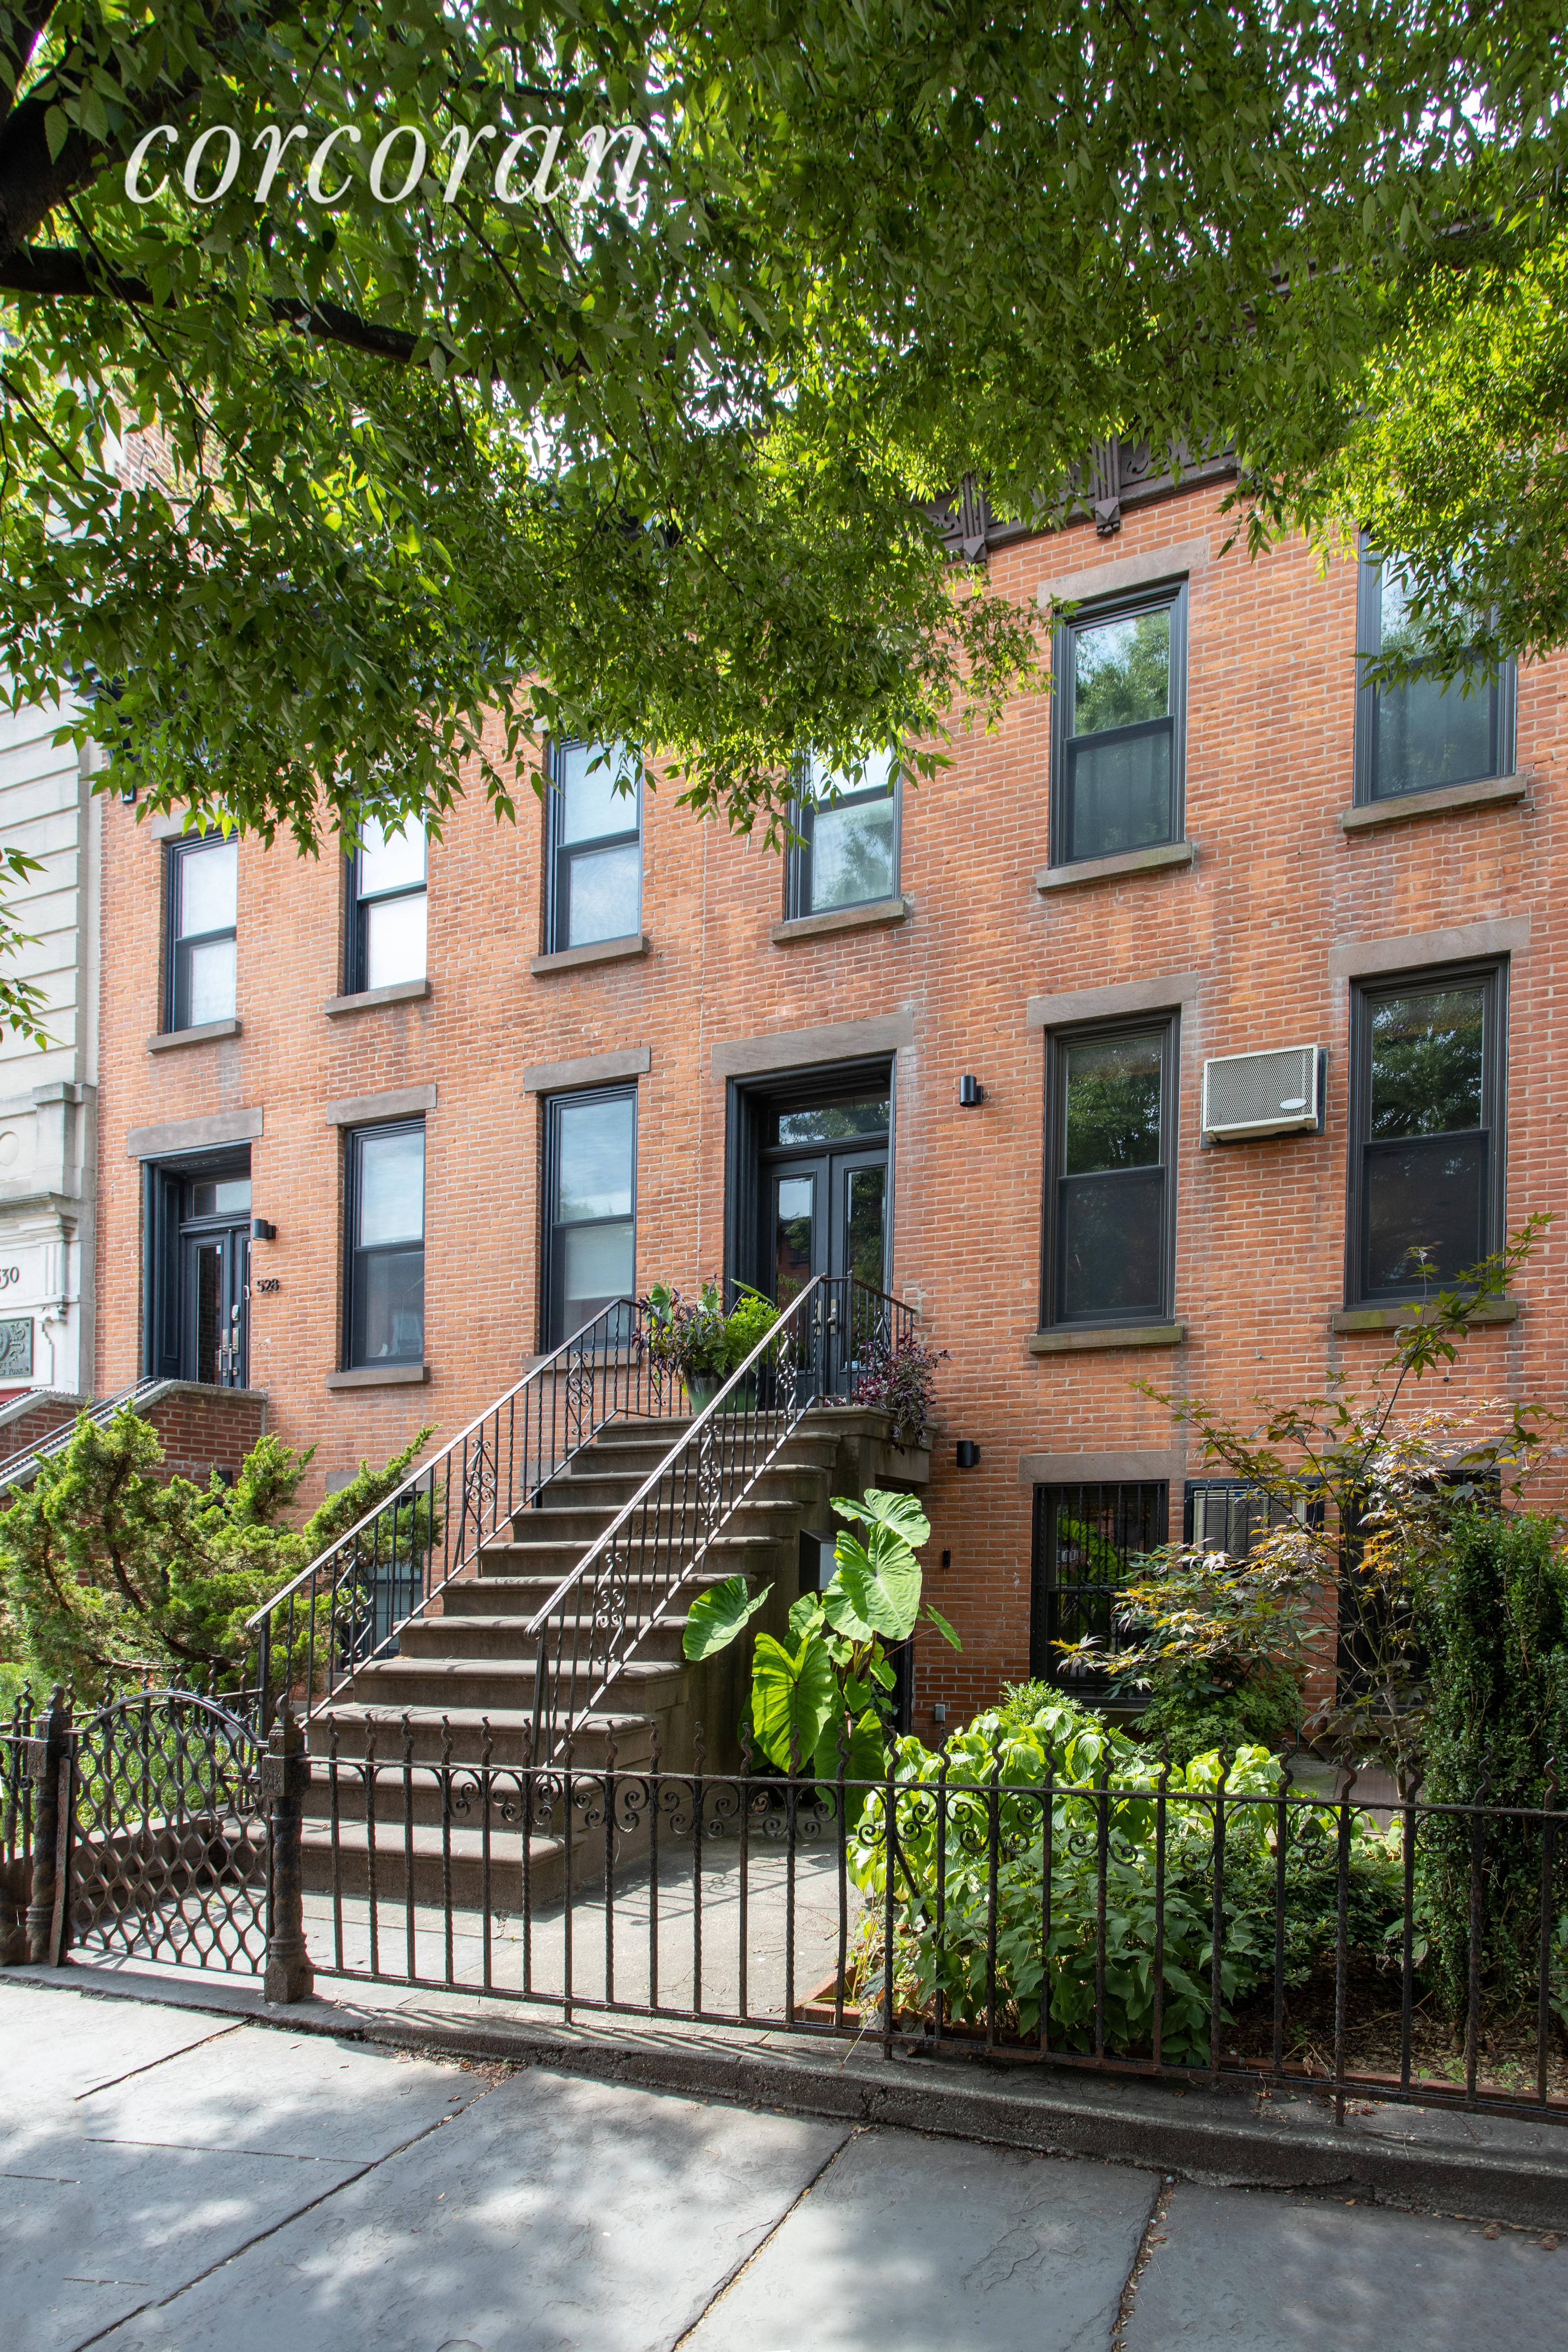 Welcome home to 526 11th street, a 20 ft wide legal 2 family brick townhouse currently configured as a thoughtfully renovated single family home.